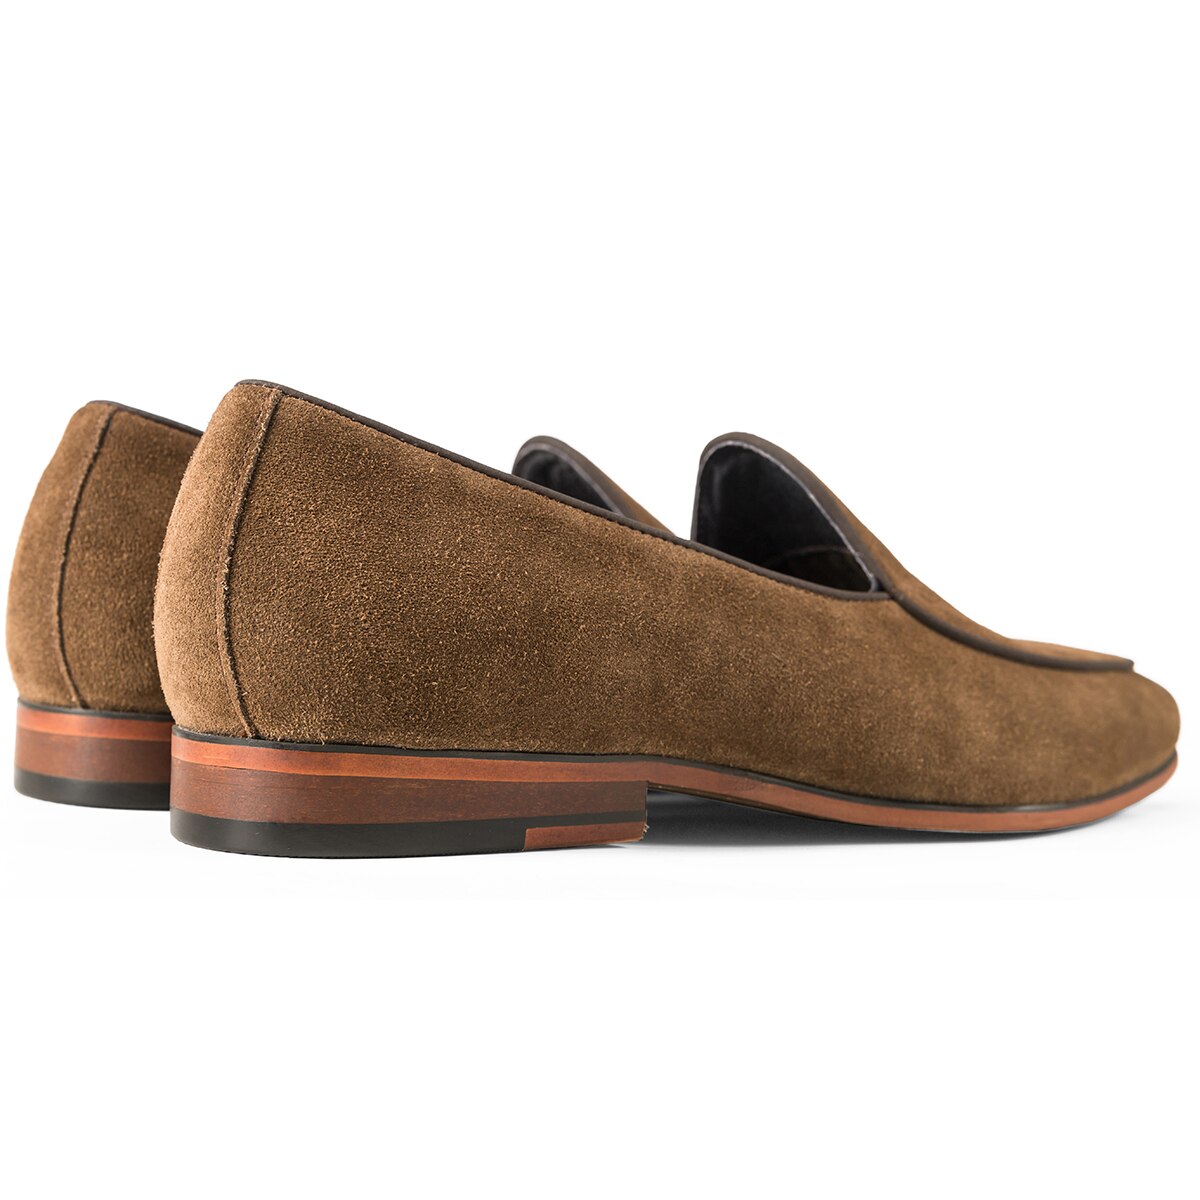 Classy Sued England Loafers